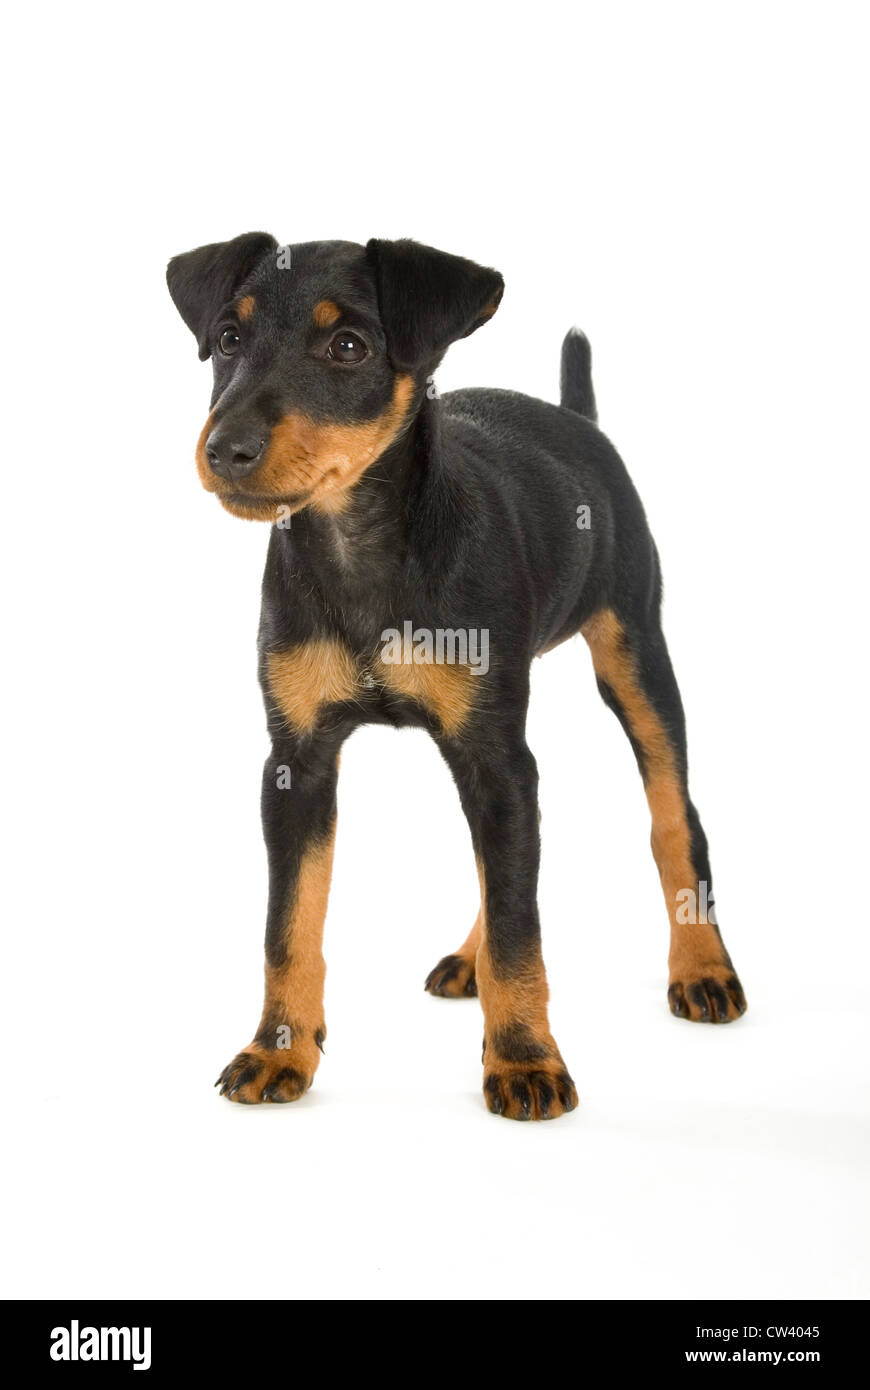 Jagdterrier, German Hunt Terrier. Puppy standing. Studio picture against a white background Stock Photo